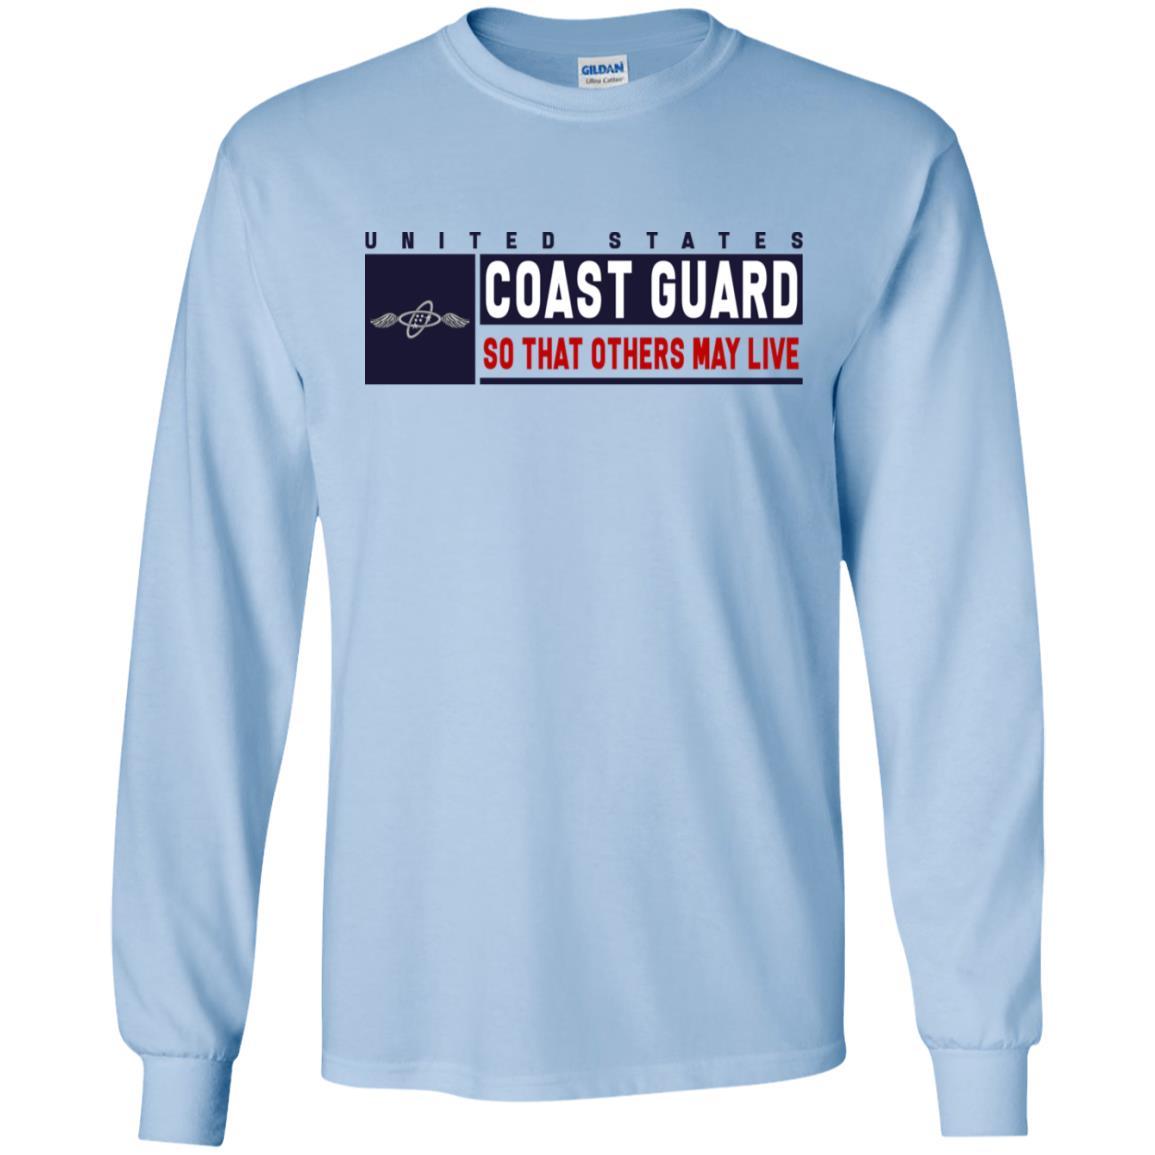 USCG AVIONICS ELECTRICAL TECHNICIAN AET Logo- So that others may live Long Sleeve - Pullover Hoodie-TShirt-USCG-Veterans Nation